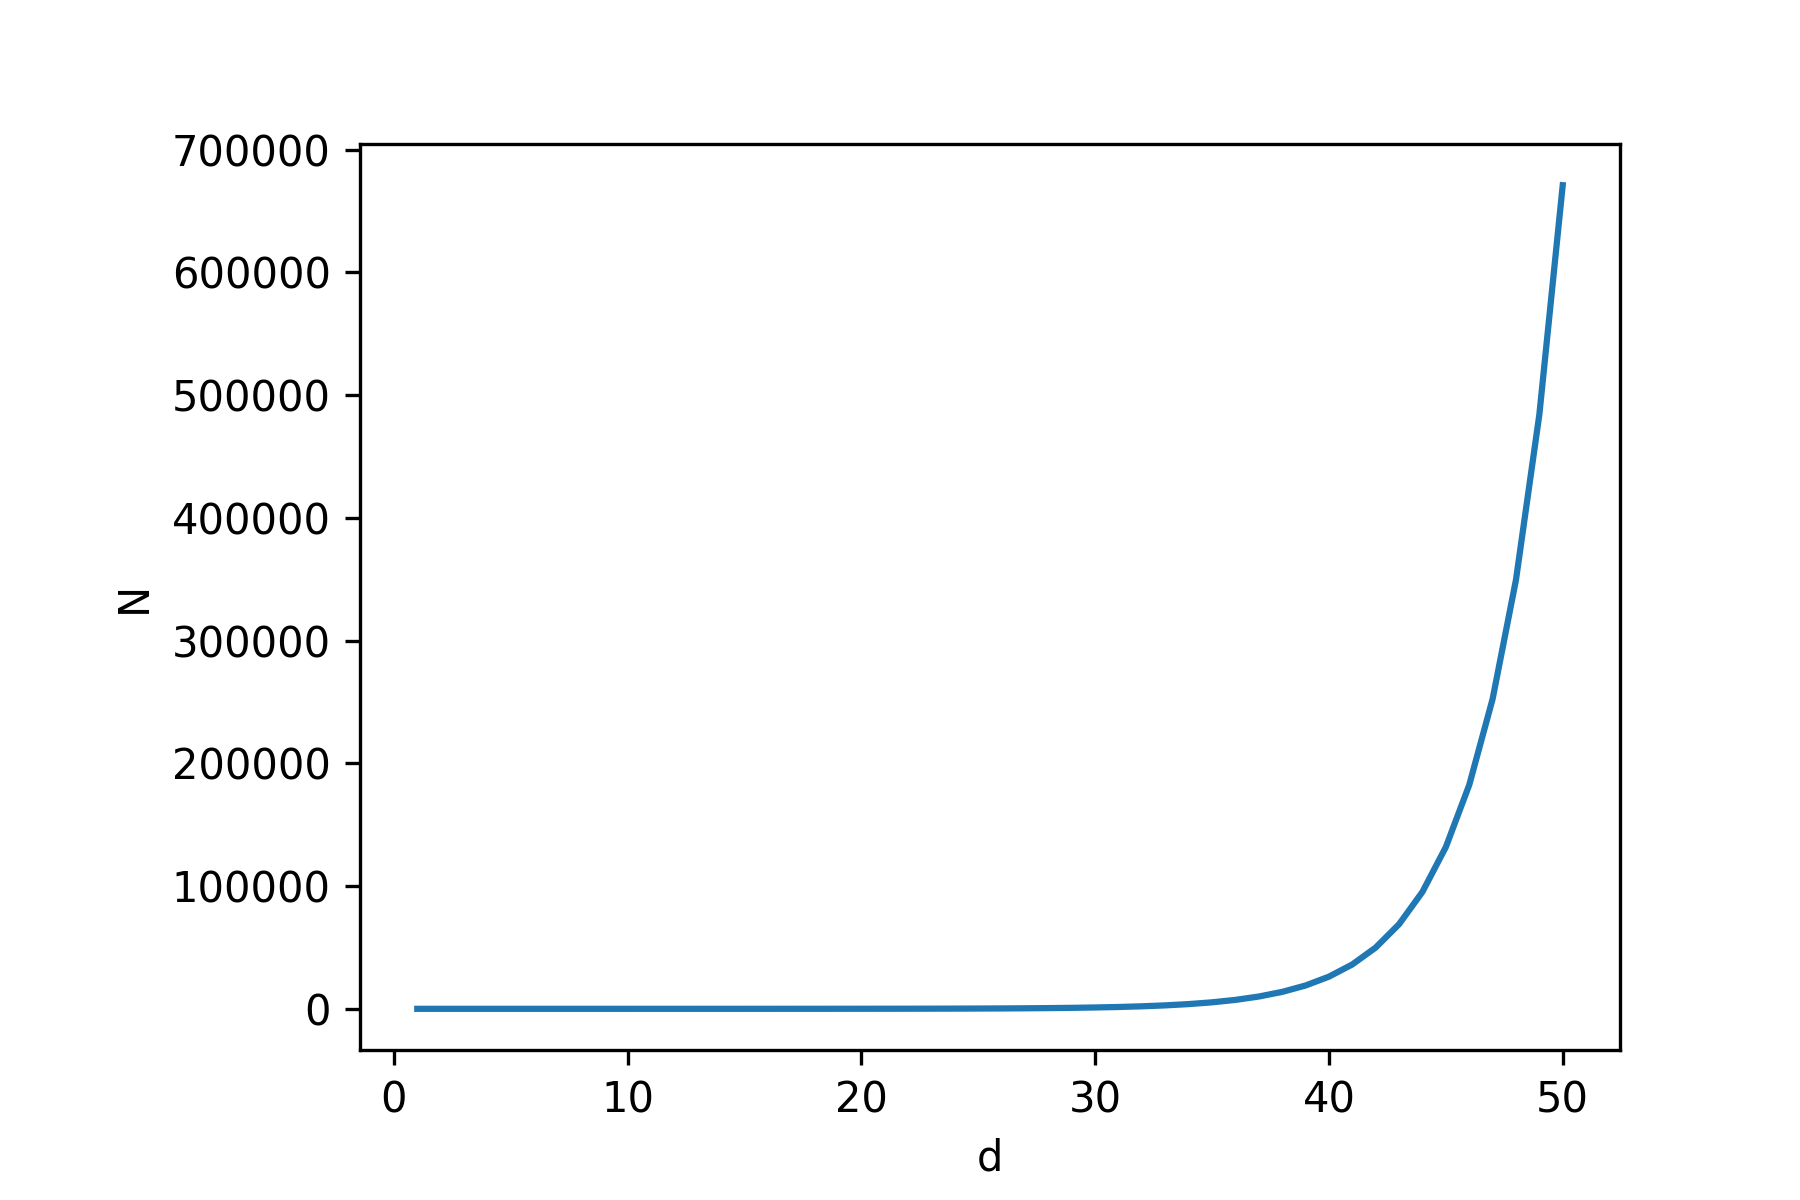 A plot showing that for increasing d on the X-axis, N increases exponentially on the Y-axis.